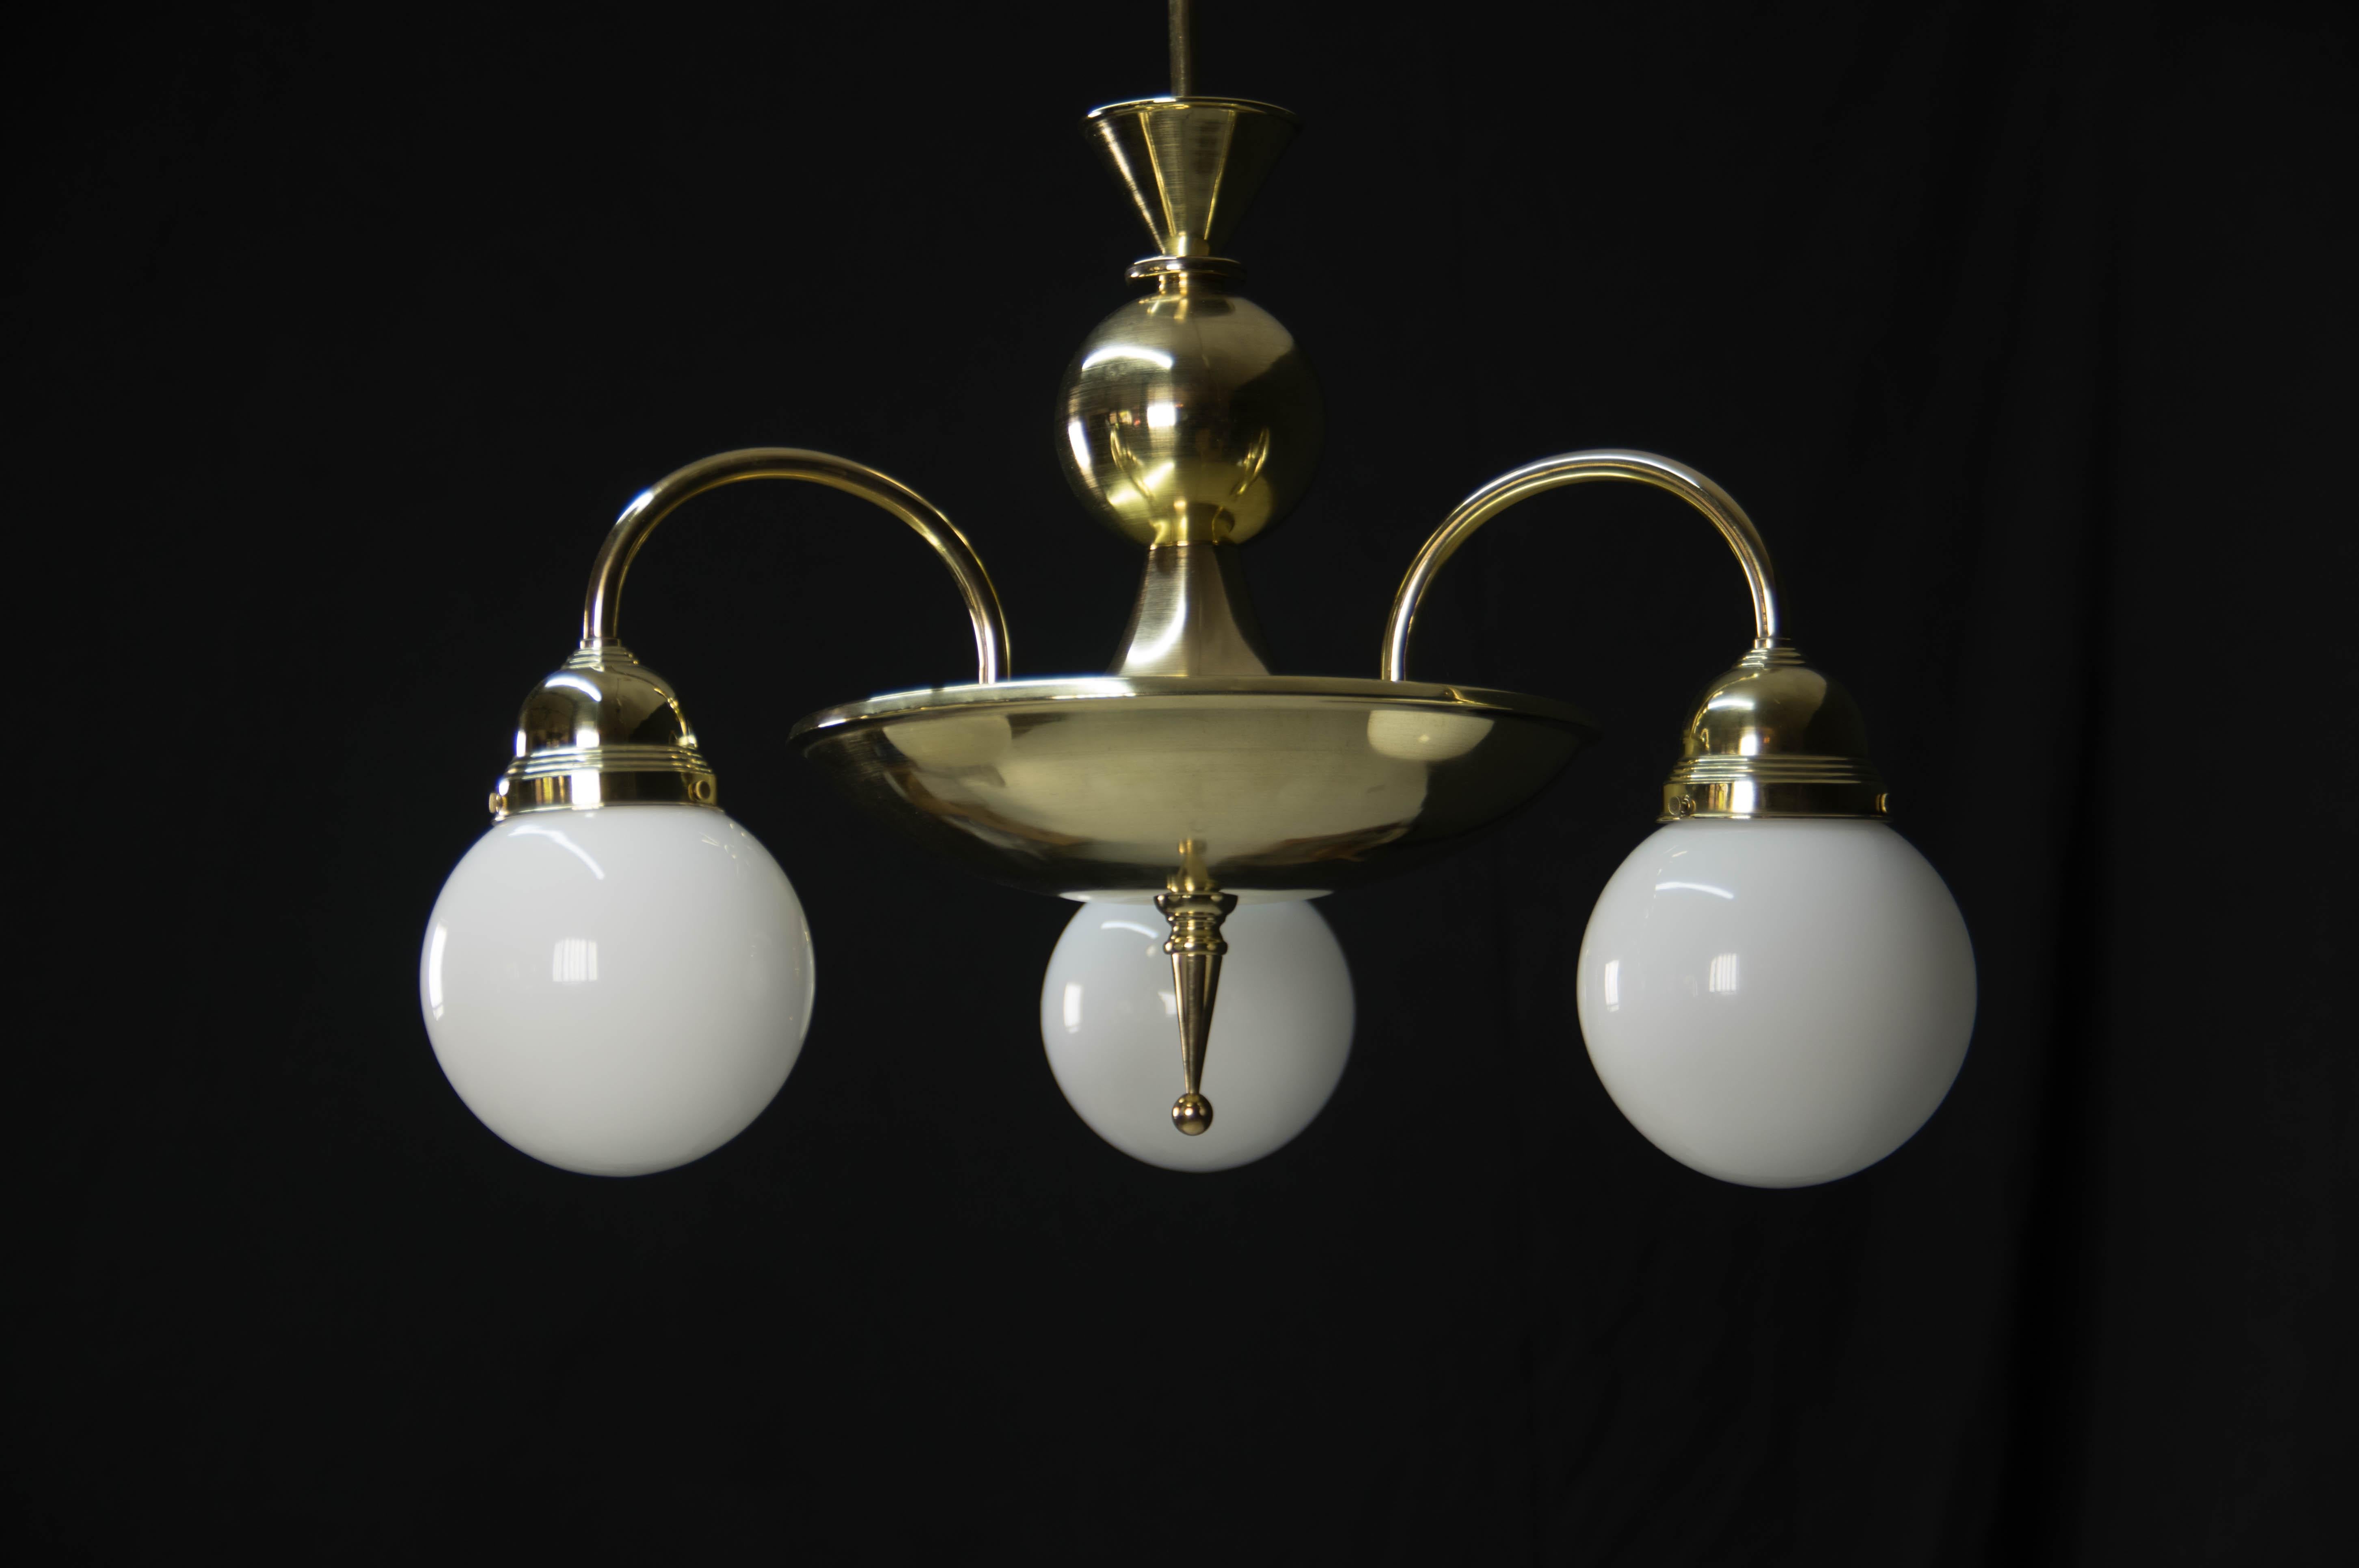 Large Rondocubistic Brass Chandelier In Excellent Condition For Sale In Praha, CZ